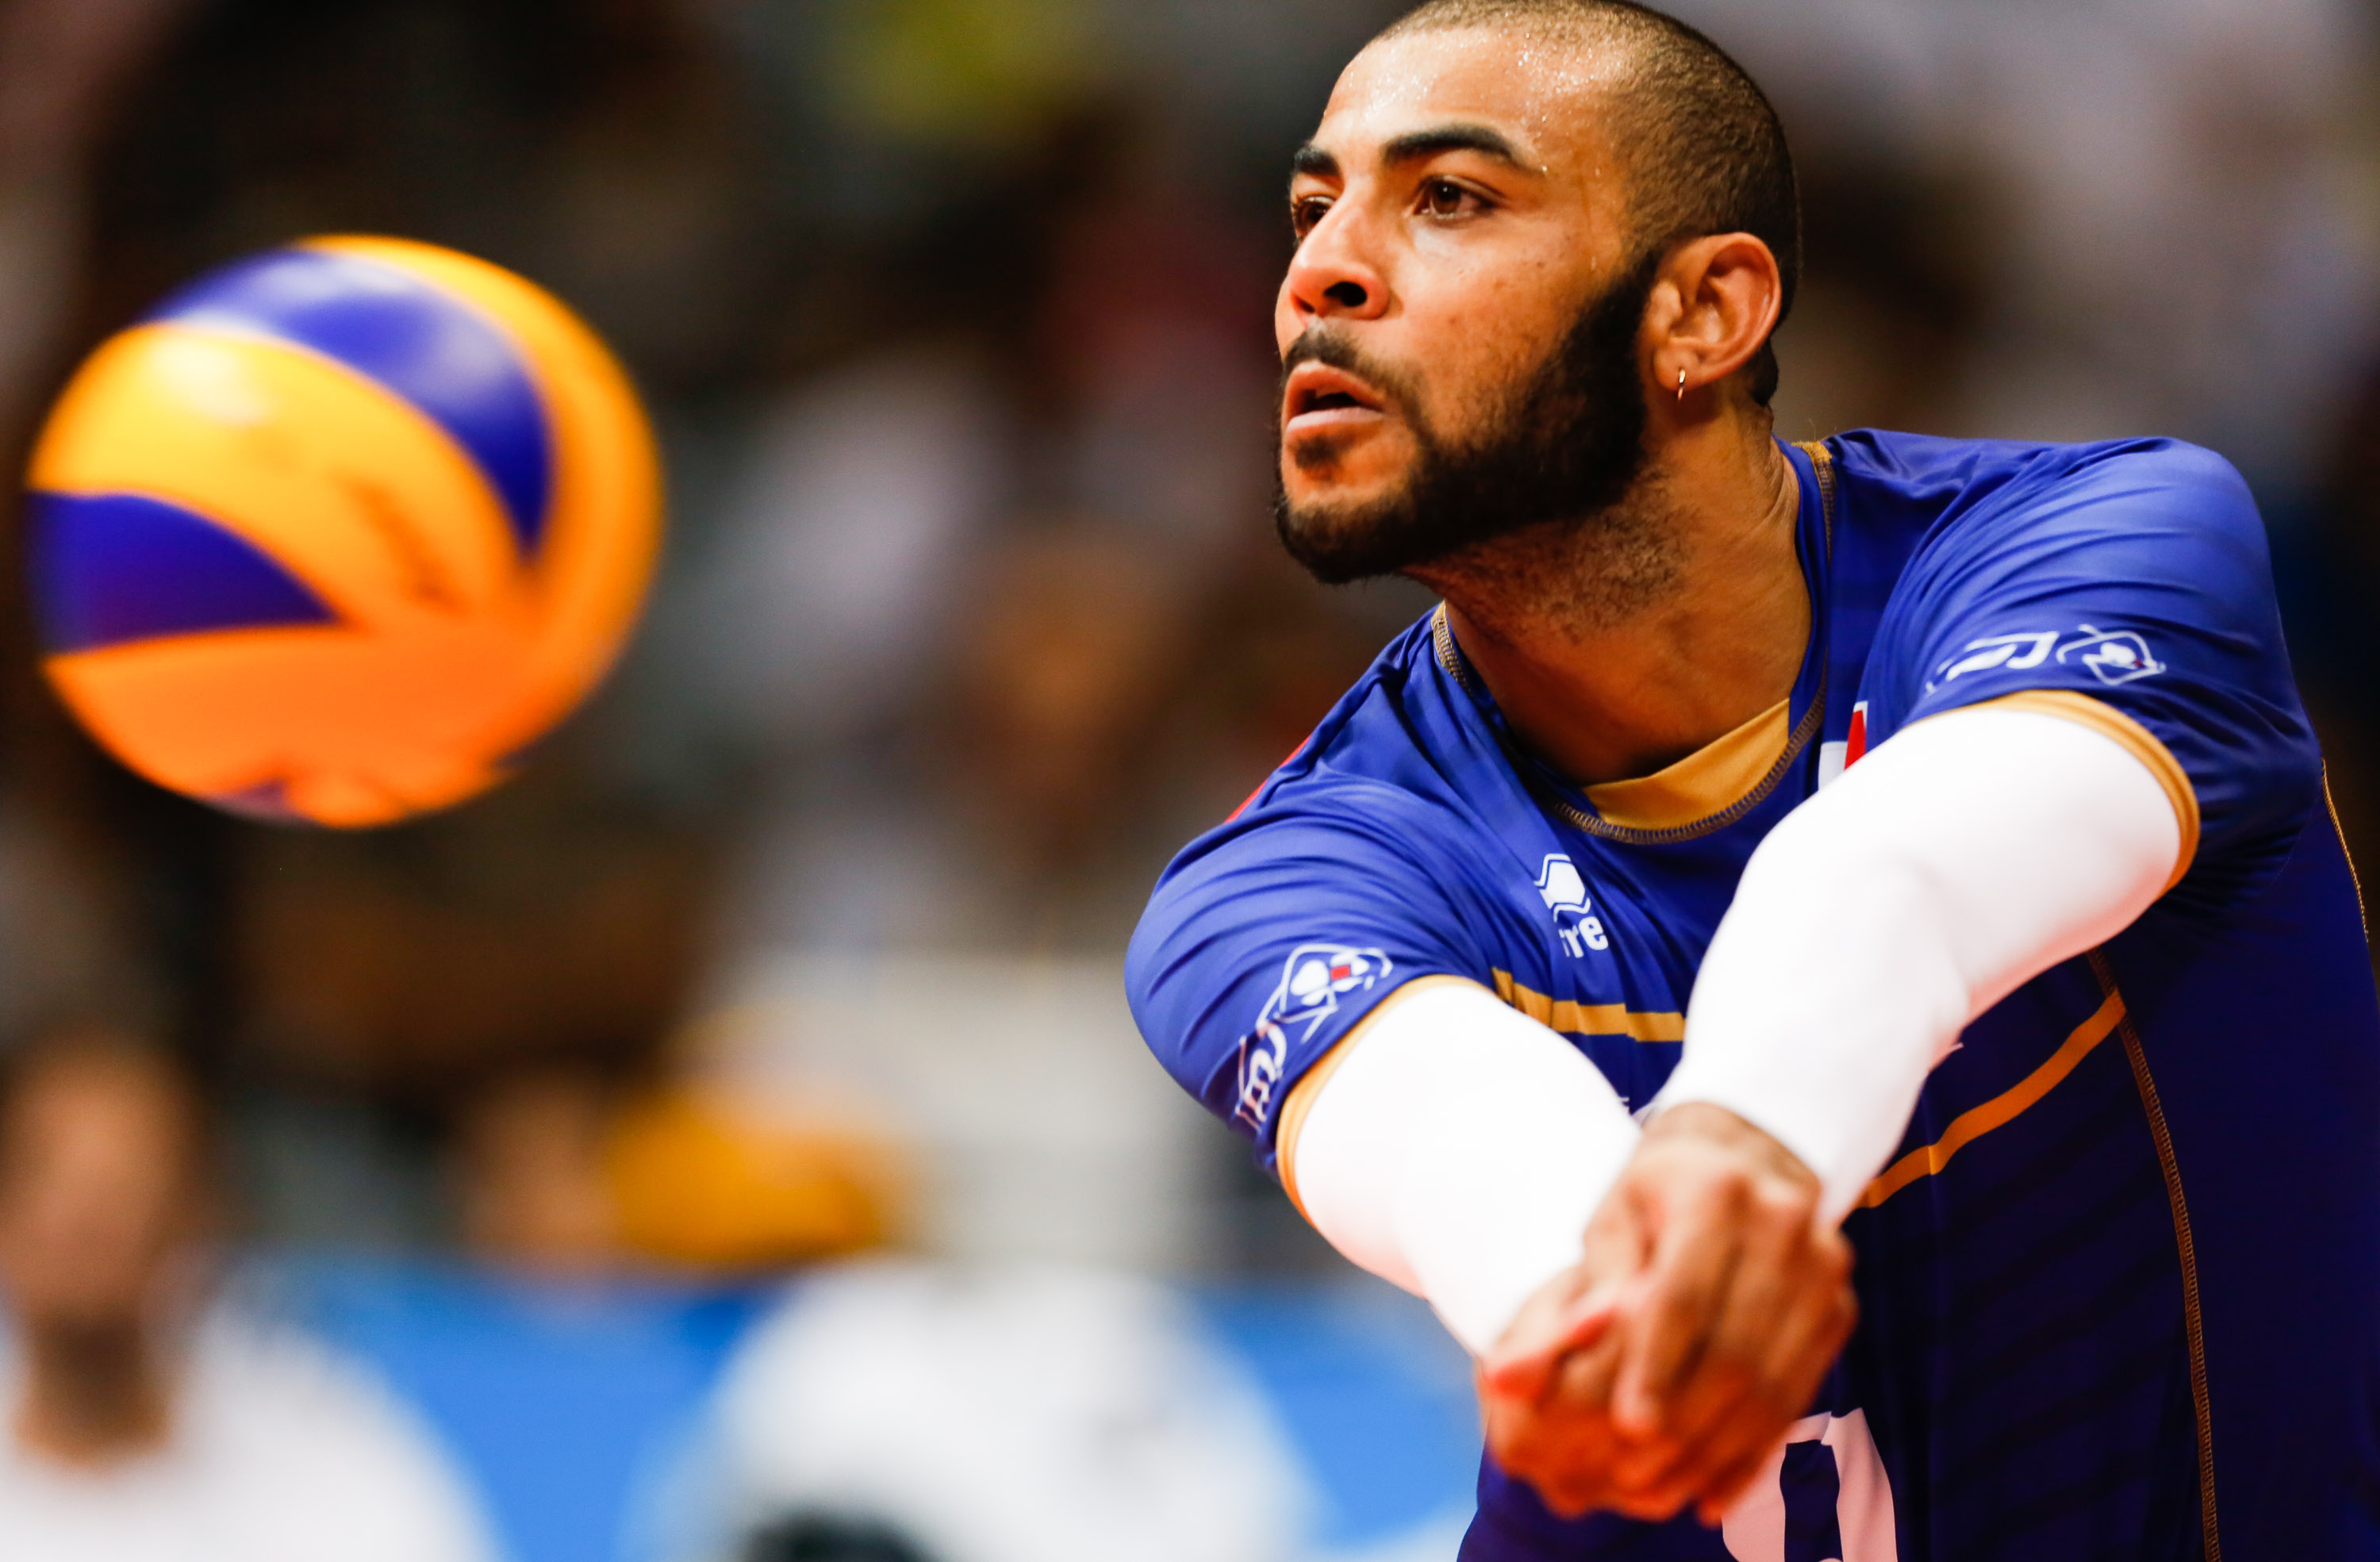 Earvin Ngapeth Best Volleyball Player 4